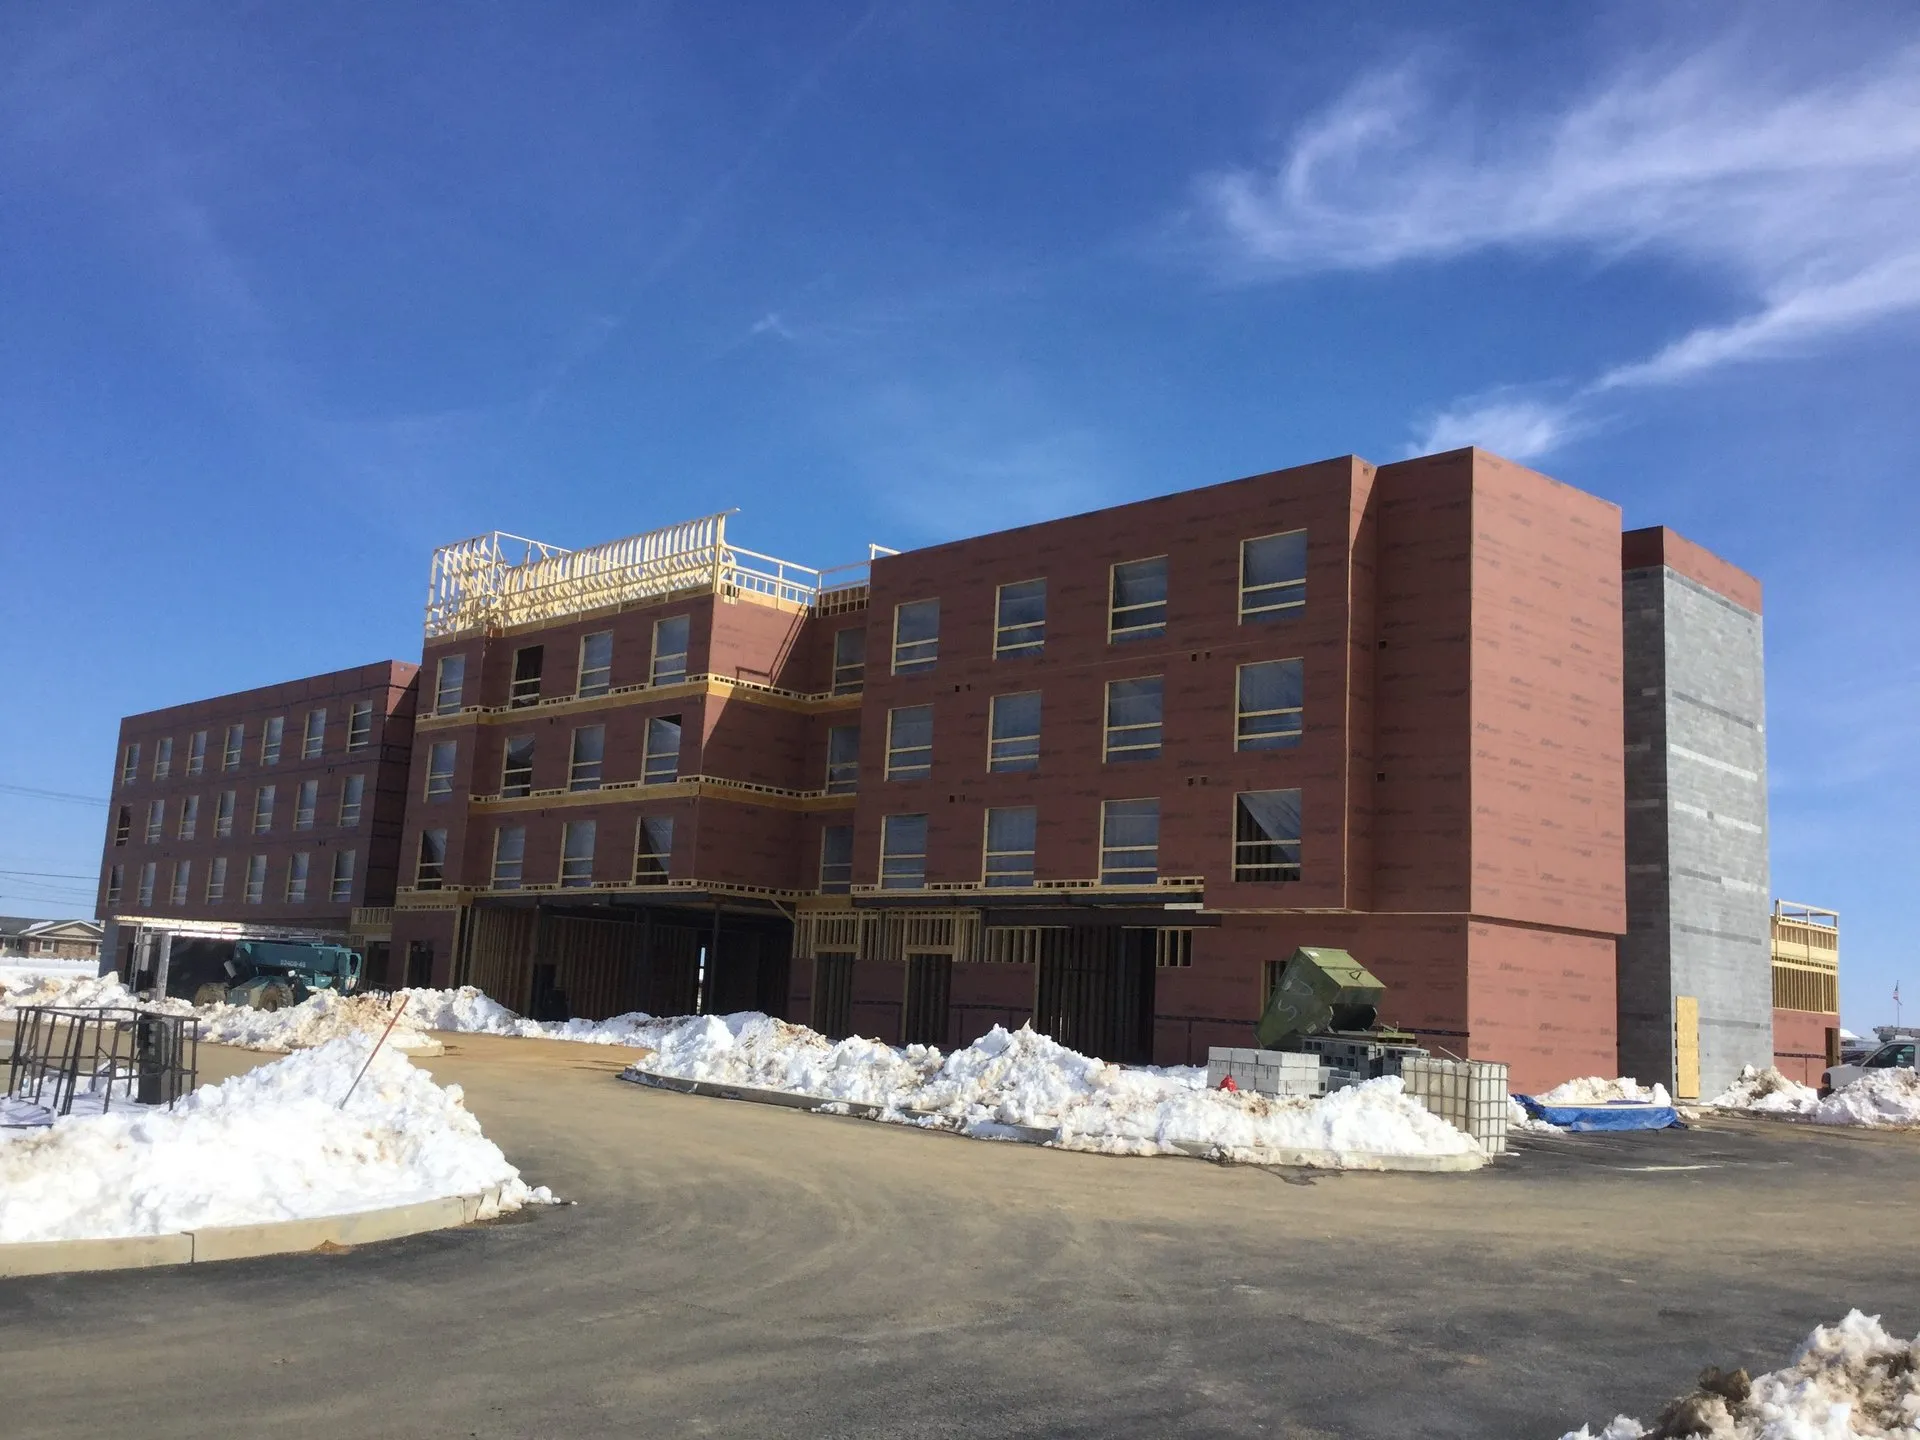 Fairfield Inn and suites Allentown PA semi finished